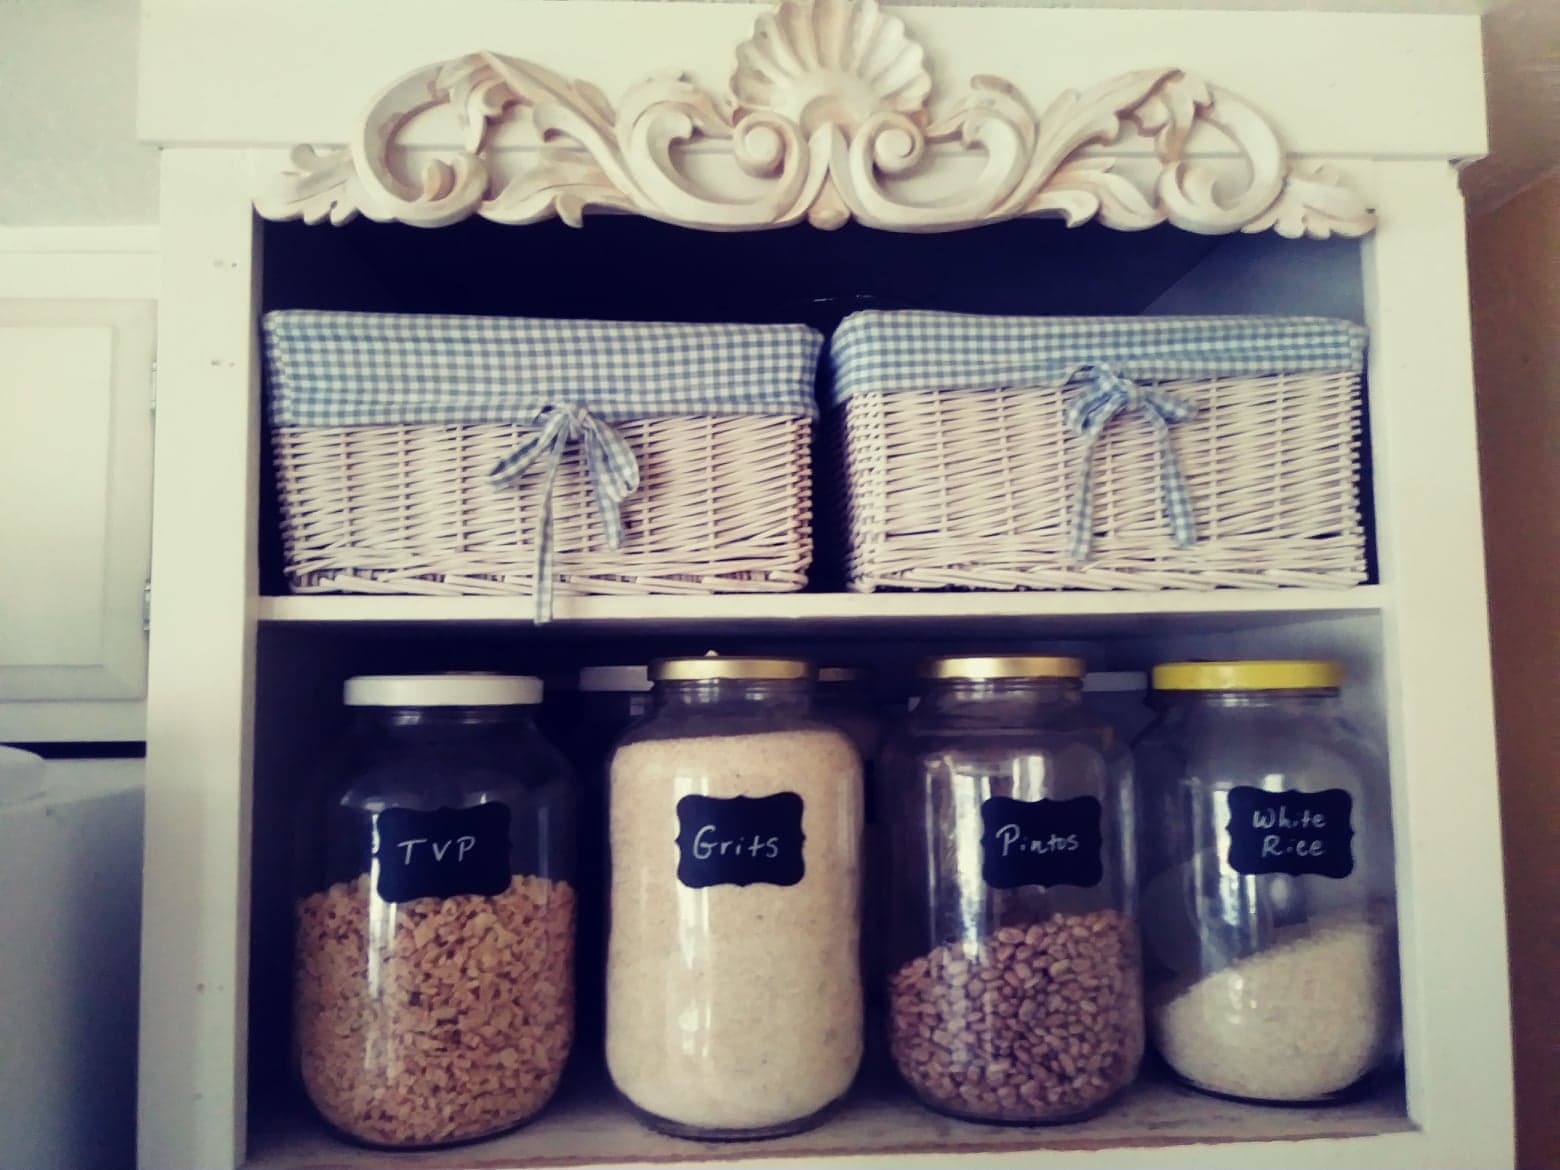 glass canisters above my oven with chalkboard labels